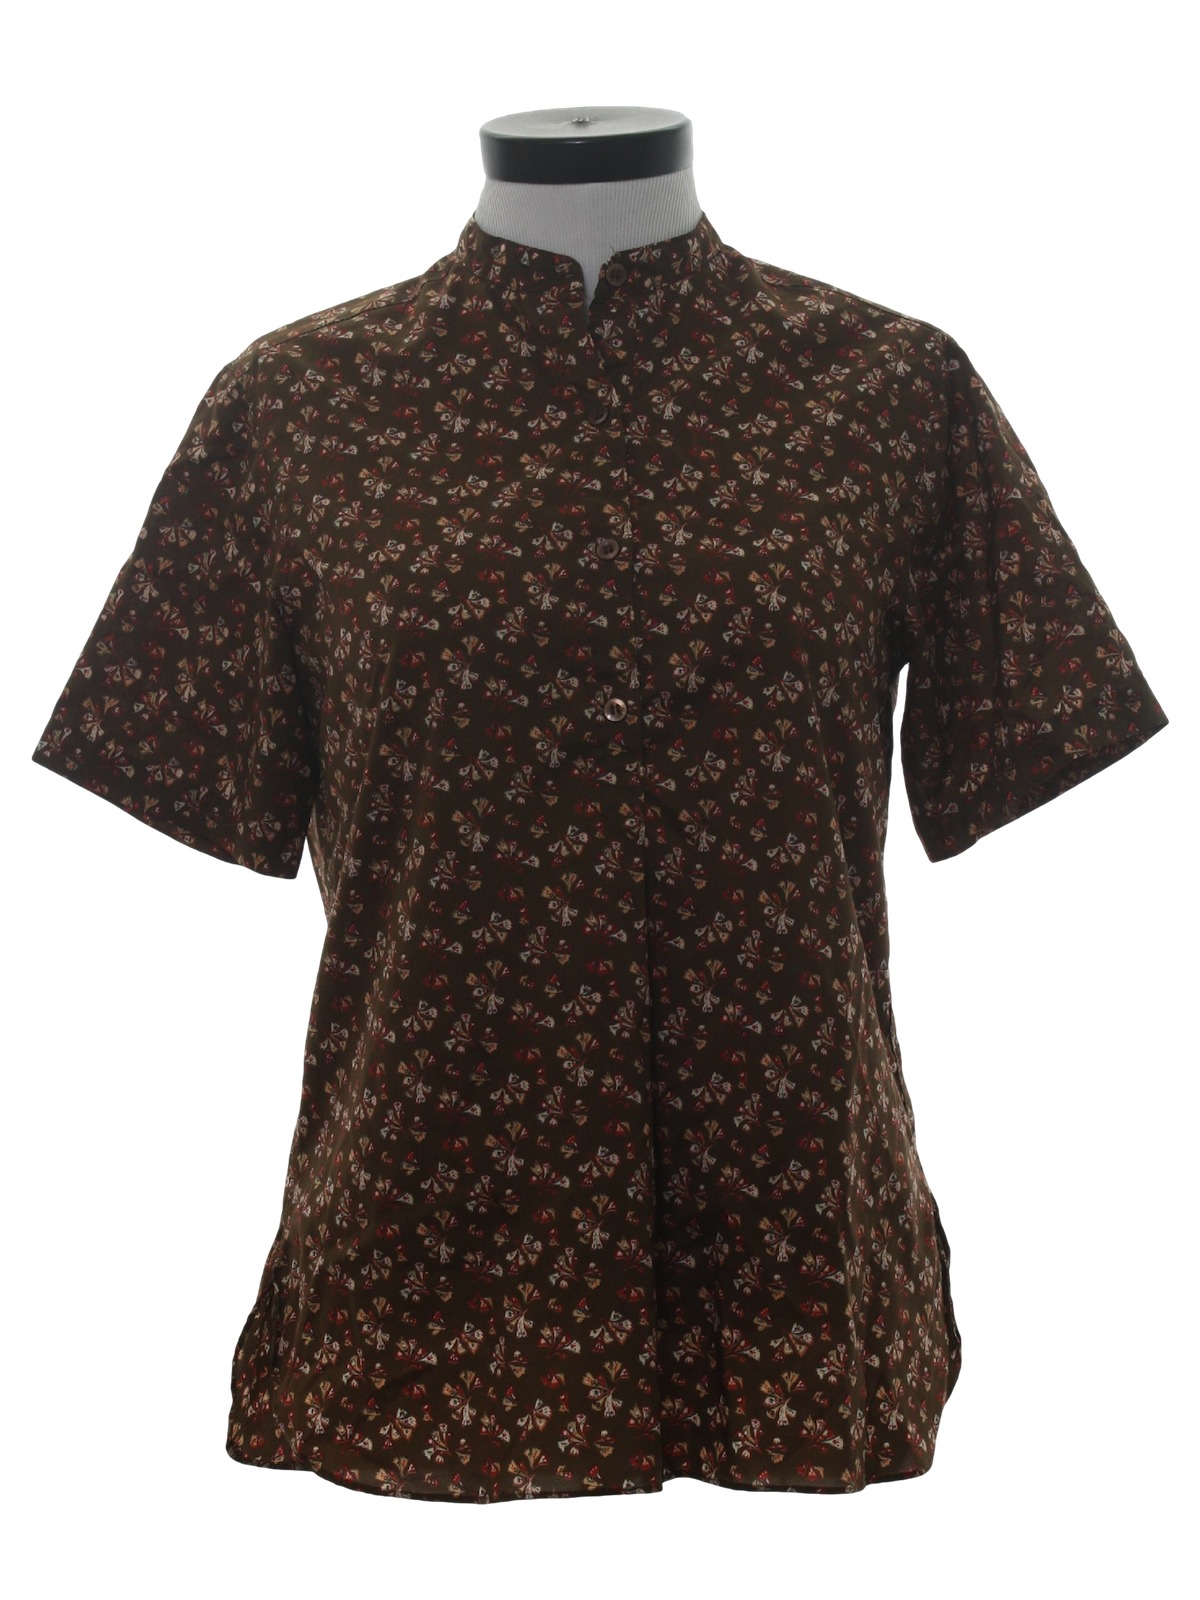 Seventies Shirt: 70s -no label- Womens chocolate brown background silky ...